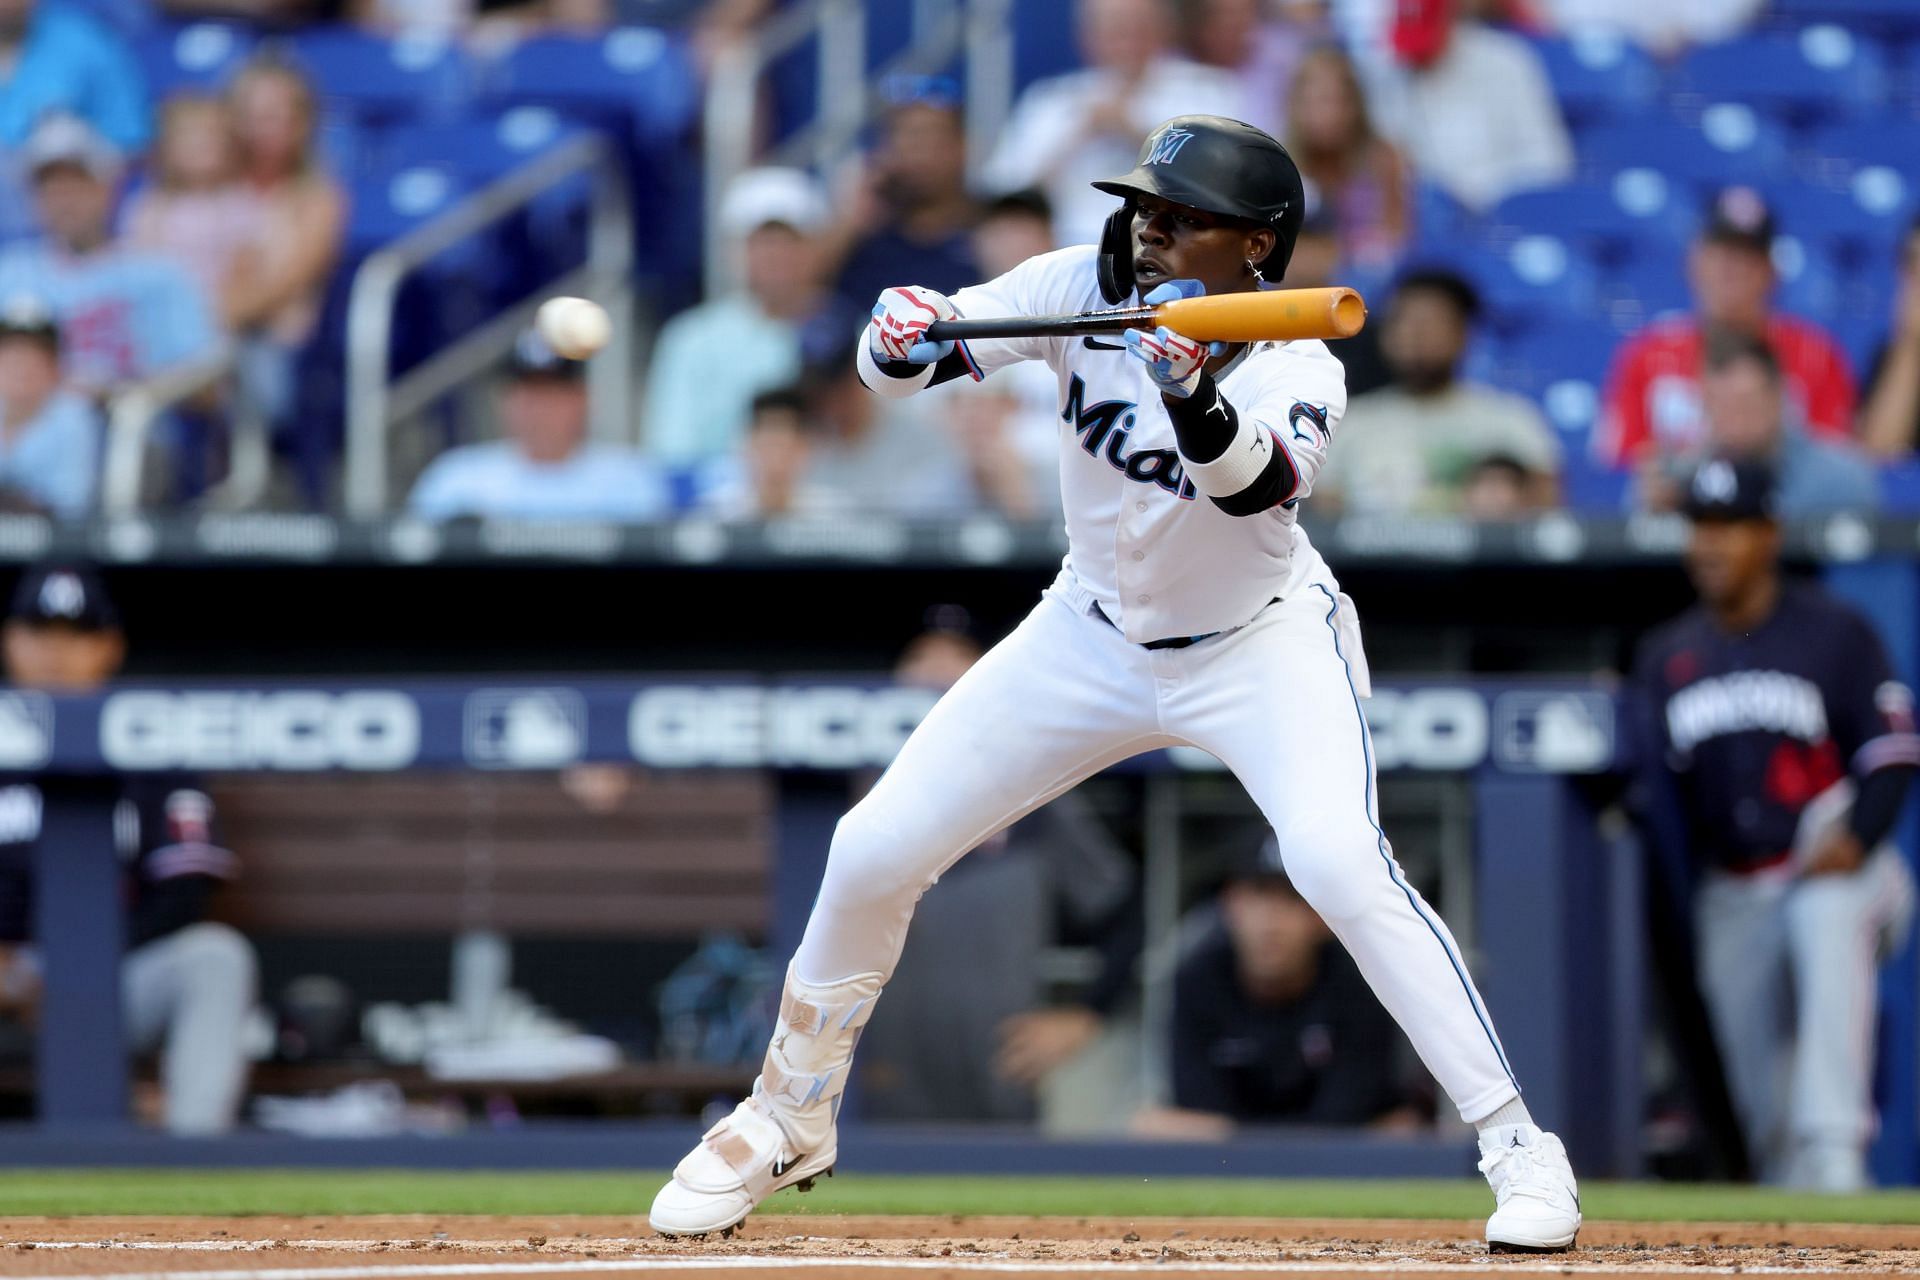 Jazz Chisholm Jr. of the Miami Marlins bunts against the Minnesota Twins.